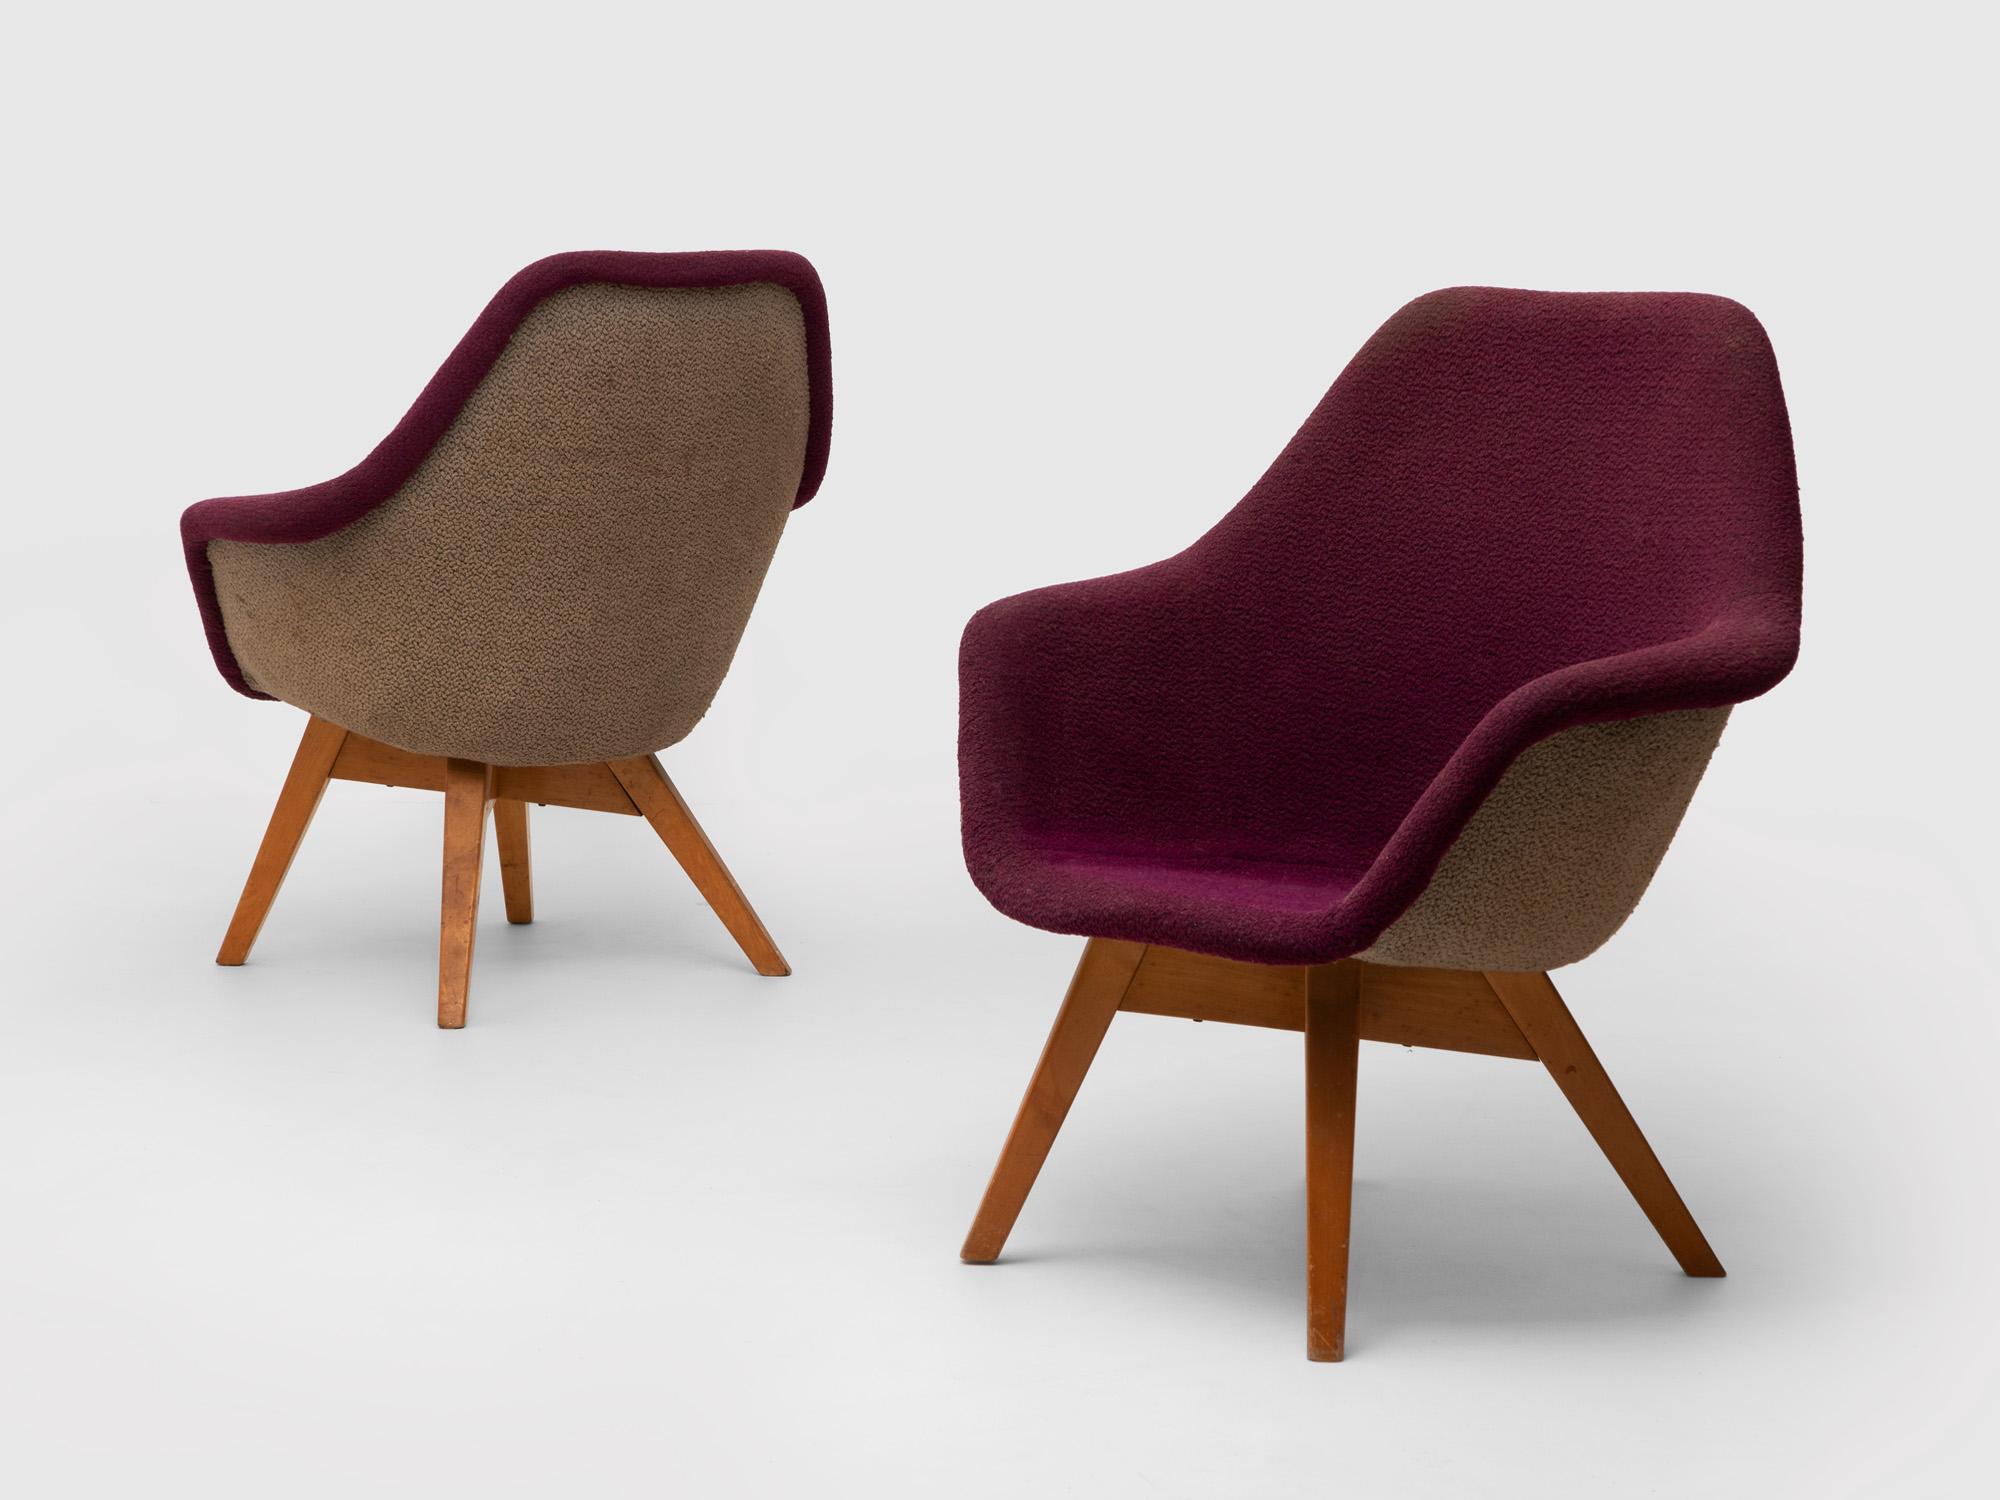 Set of 2 lounge chairs by Miroslav Navratil, fiberglass shell upholstered in violet and grey fabric, oak base, 1960s. Original condition, upholstery needs updating.